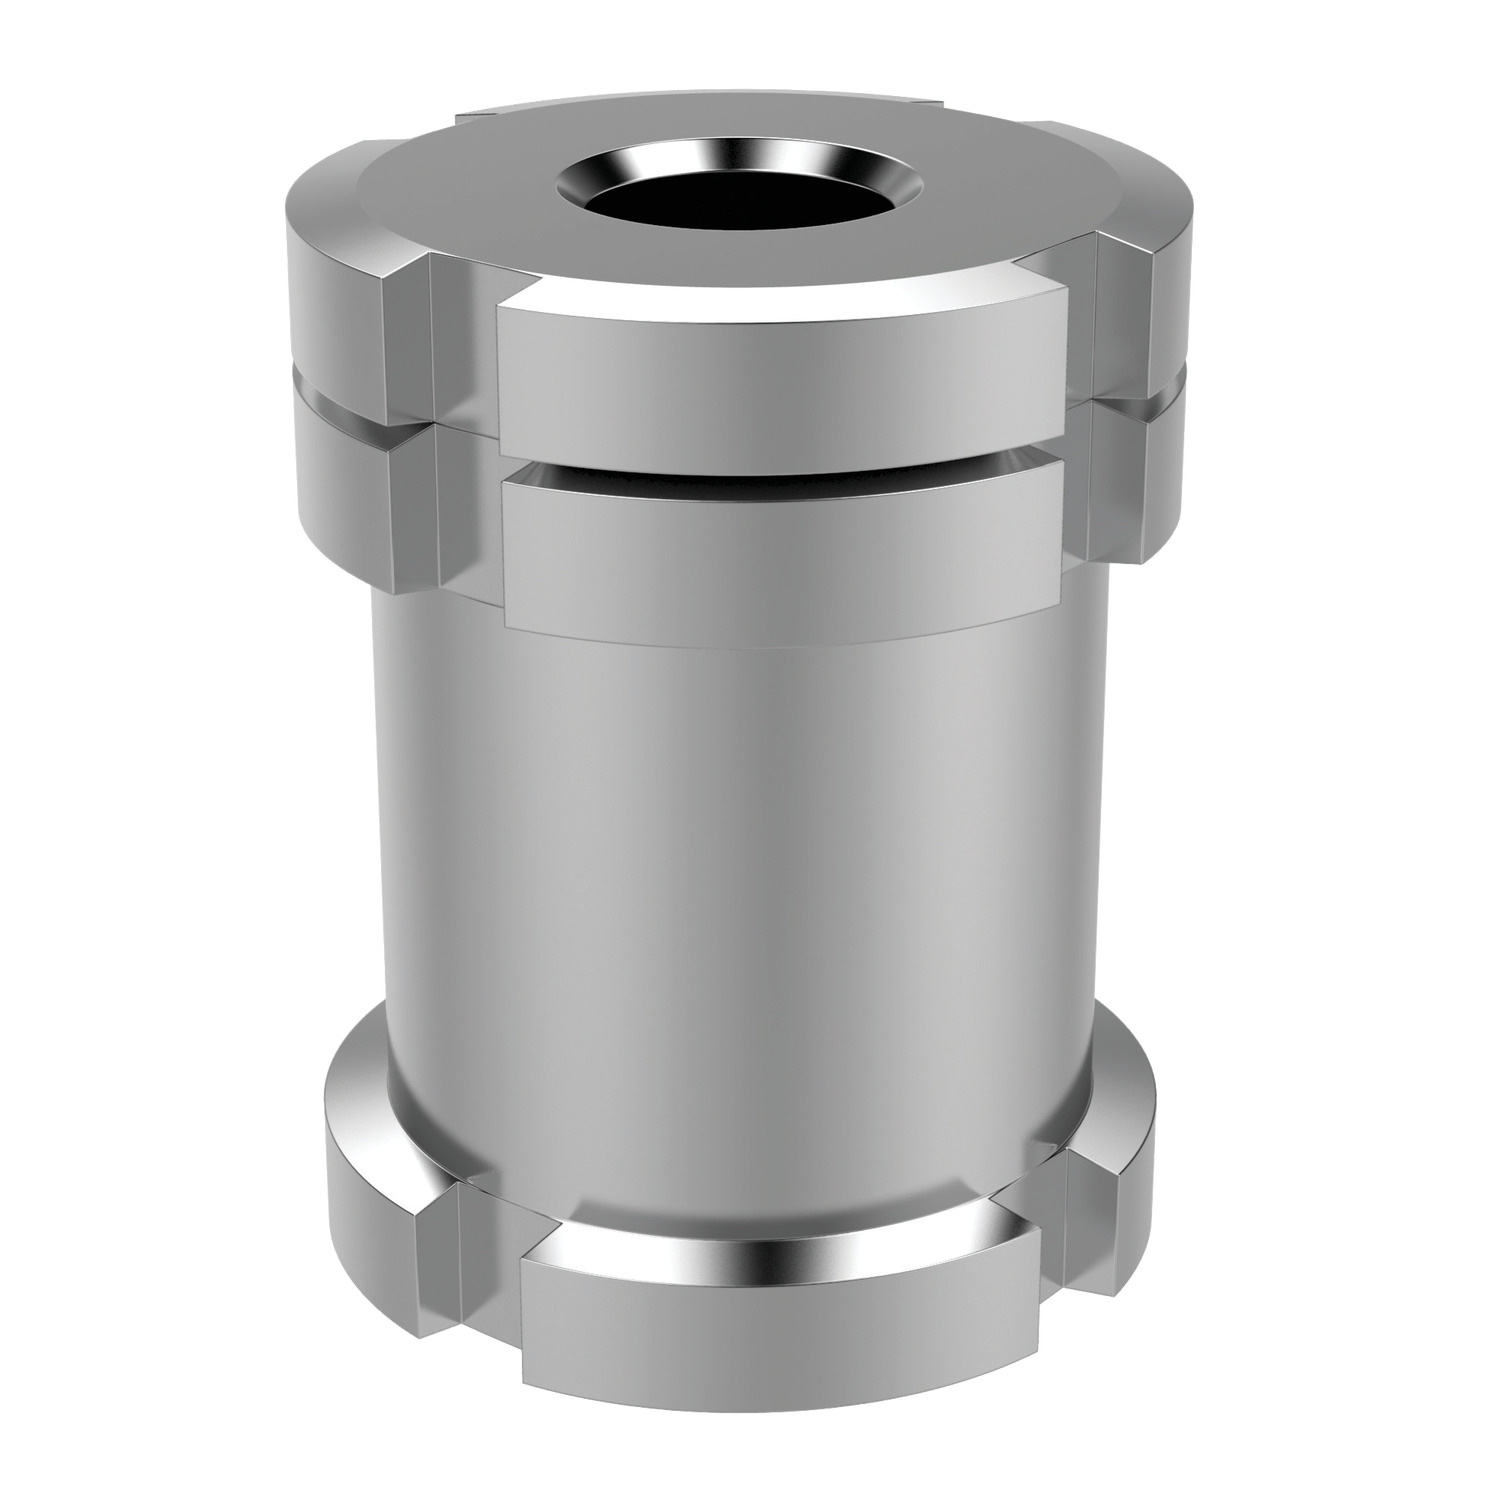 Precision Adjuster Precision adjuster for setting height and then bolting down. Designed for use in applications with limited space. Made from zinc plated steel or stainless (A1, A4 on request)